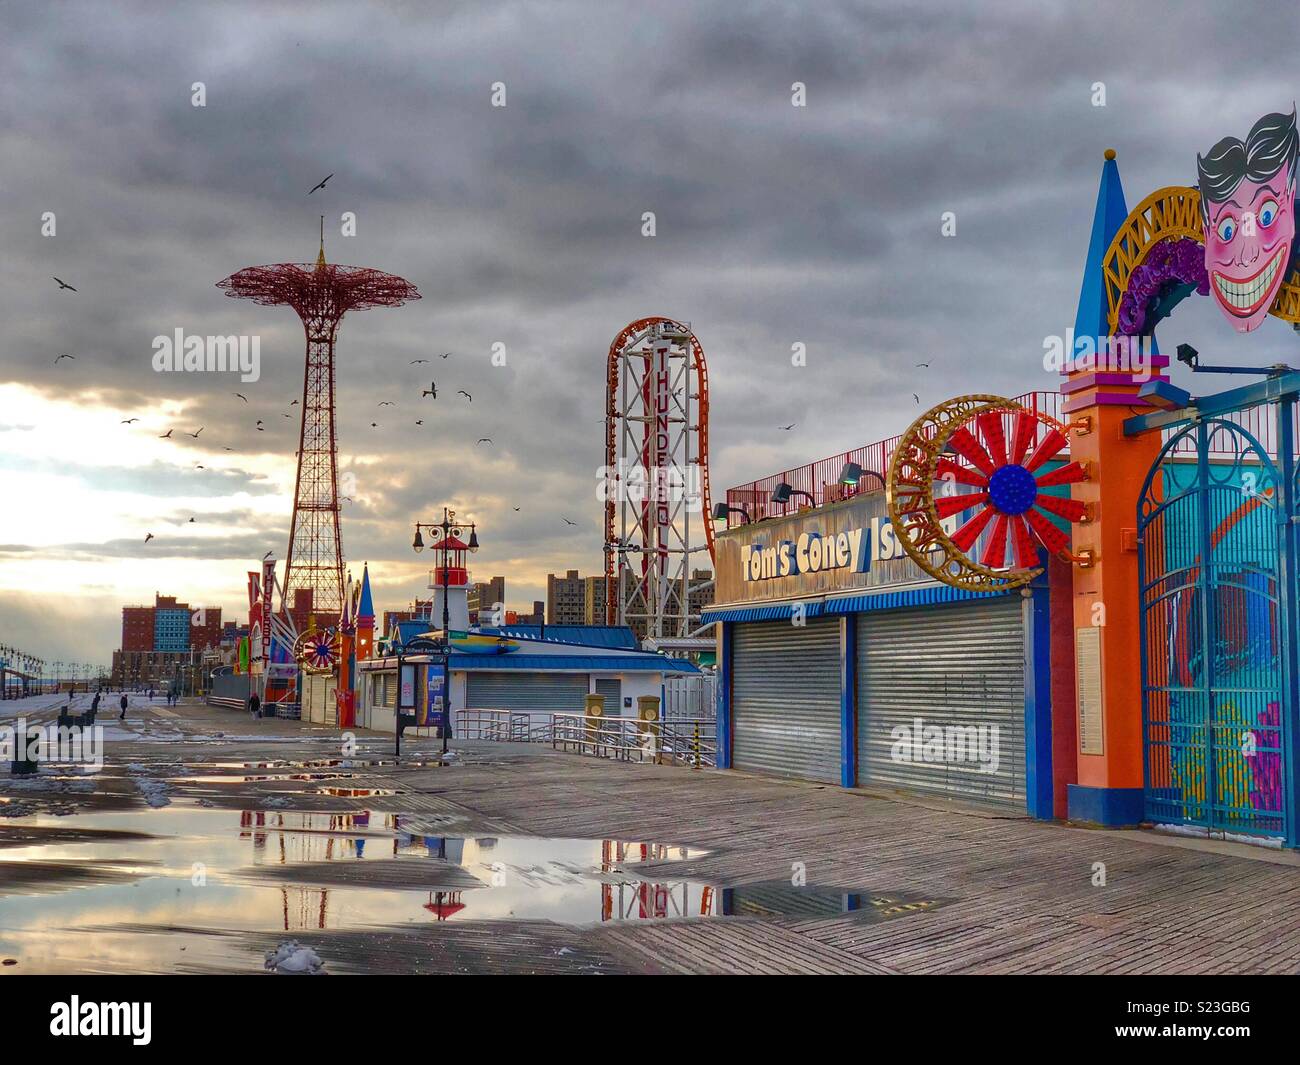 A deserted Cony Island in winter - New York City Stock Photo